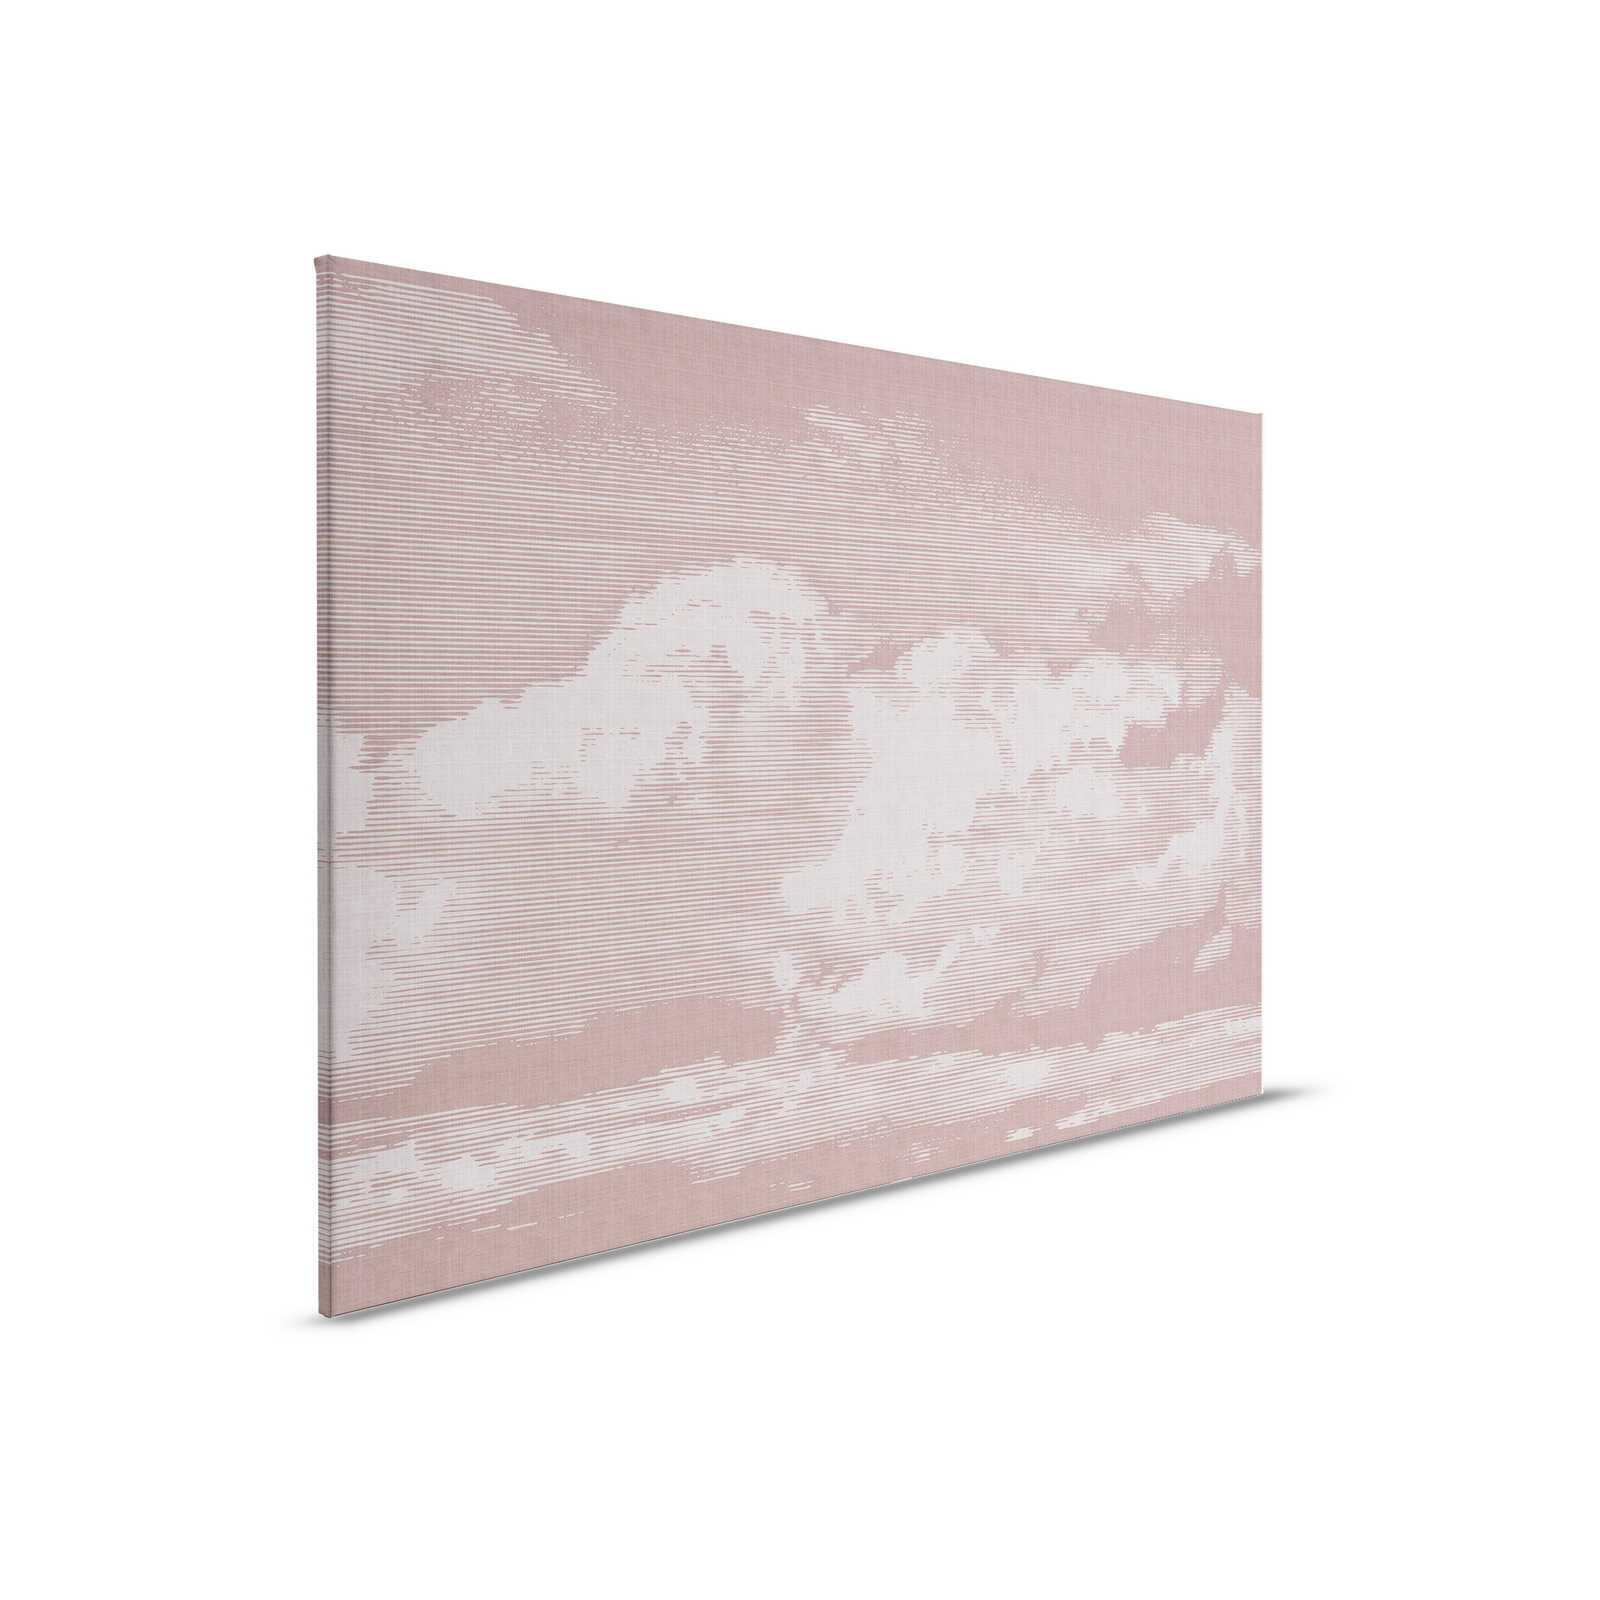 Clouds 3 - Heavenly canvas picture with cloud motif - Nature linen look - 0.90 m x 0.60 m
